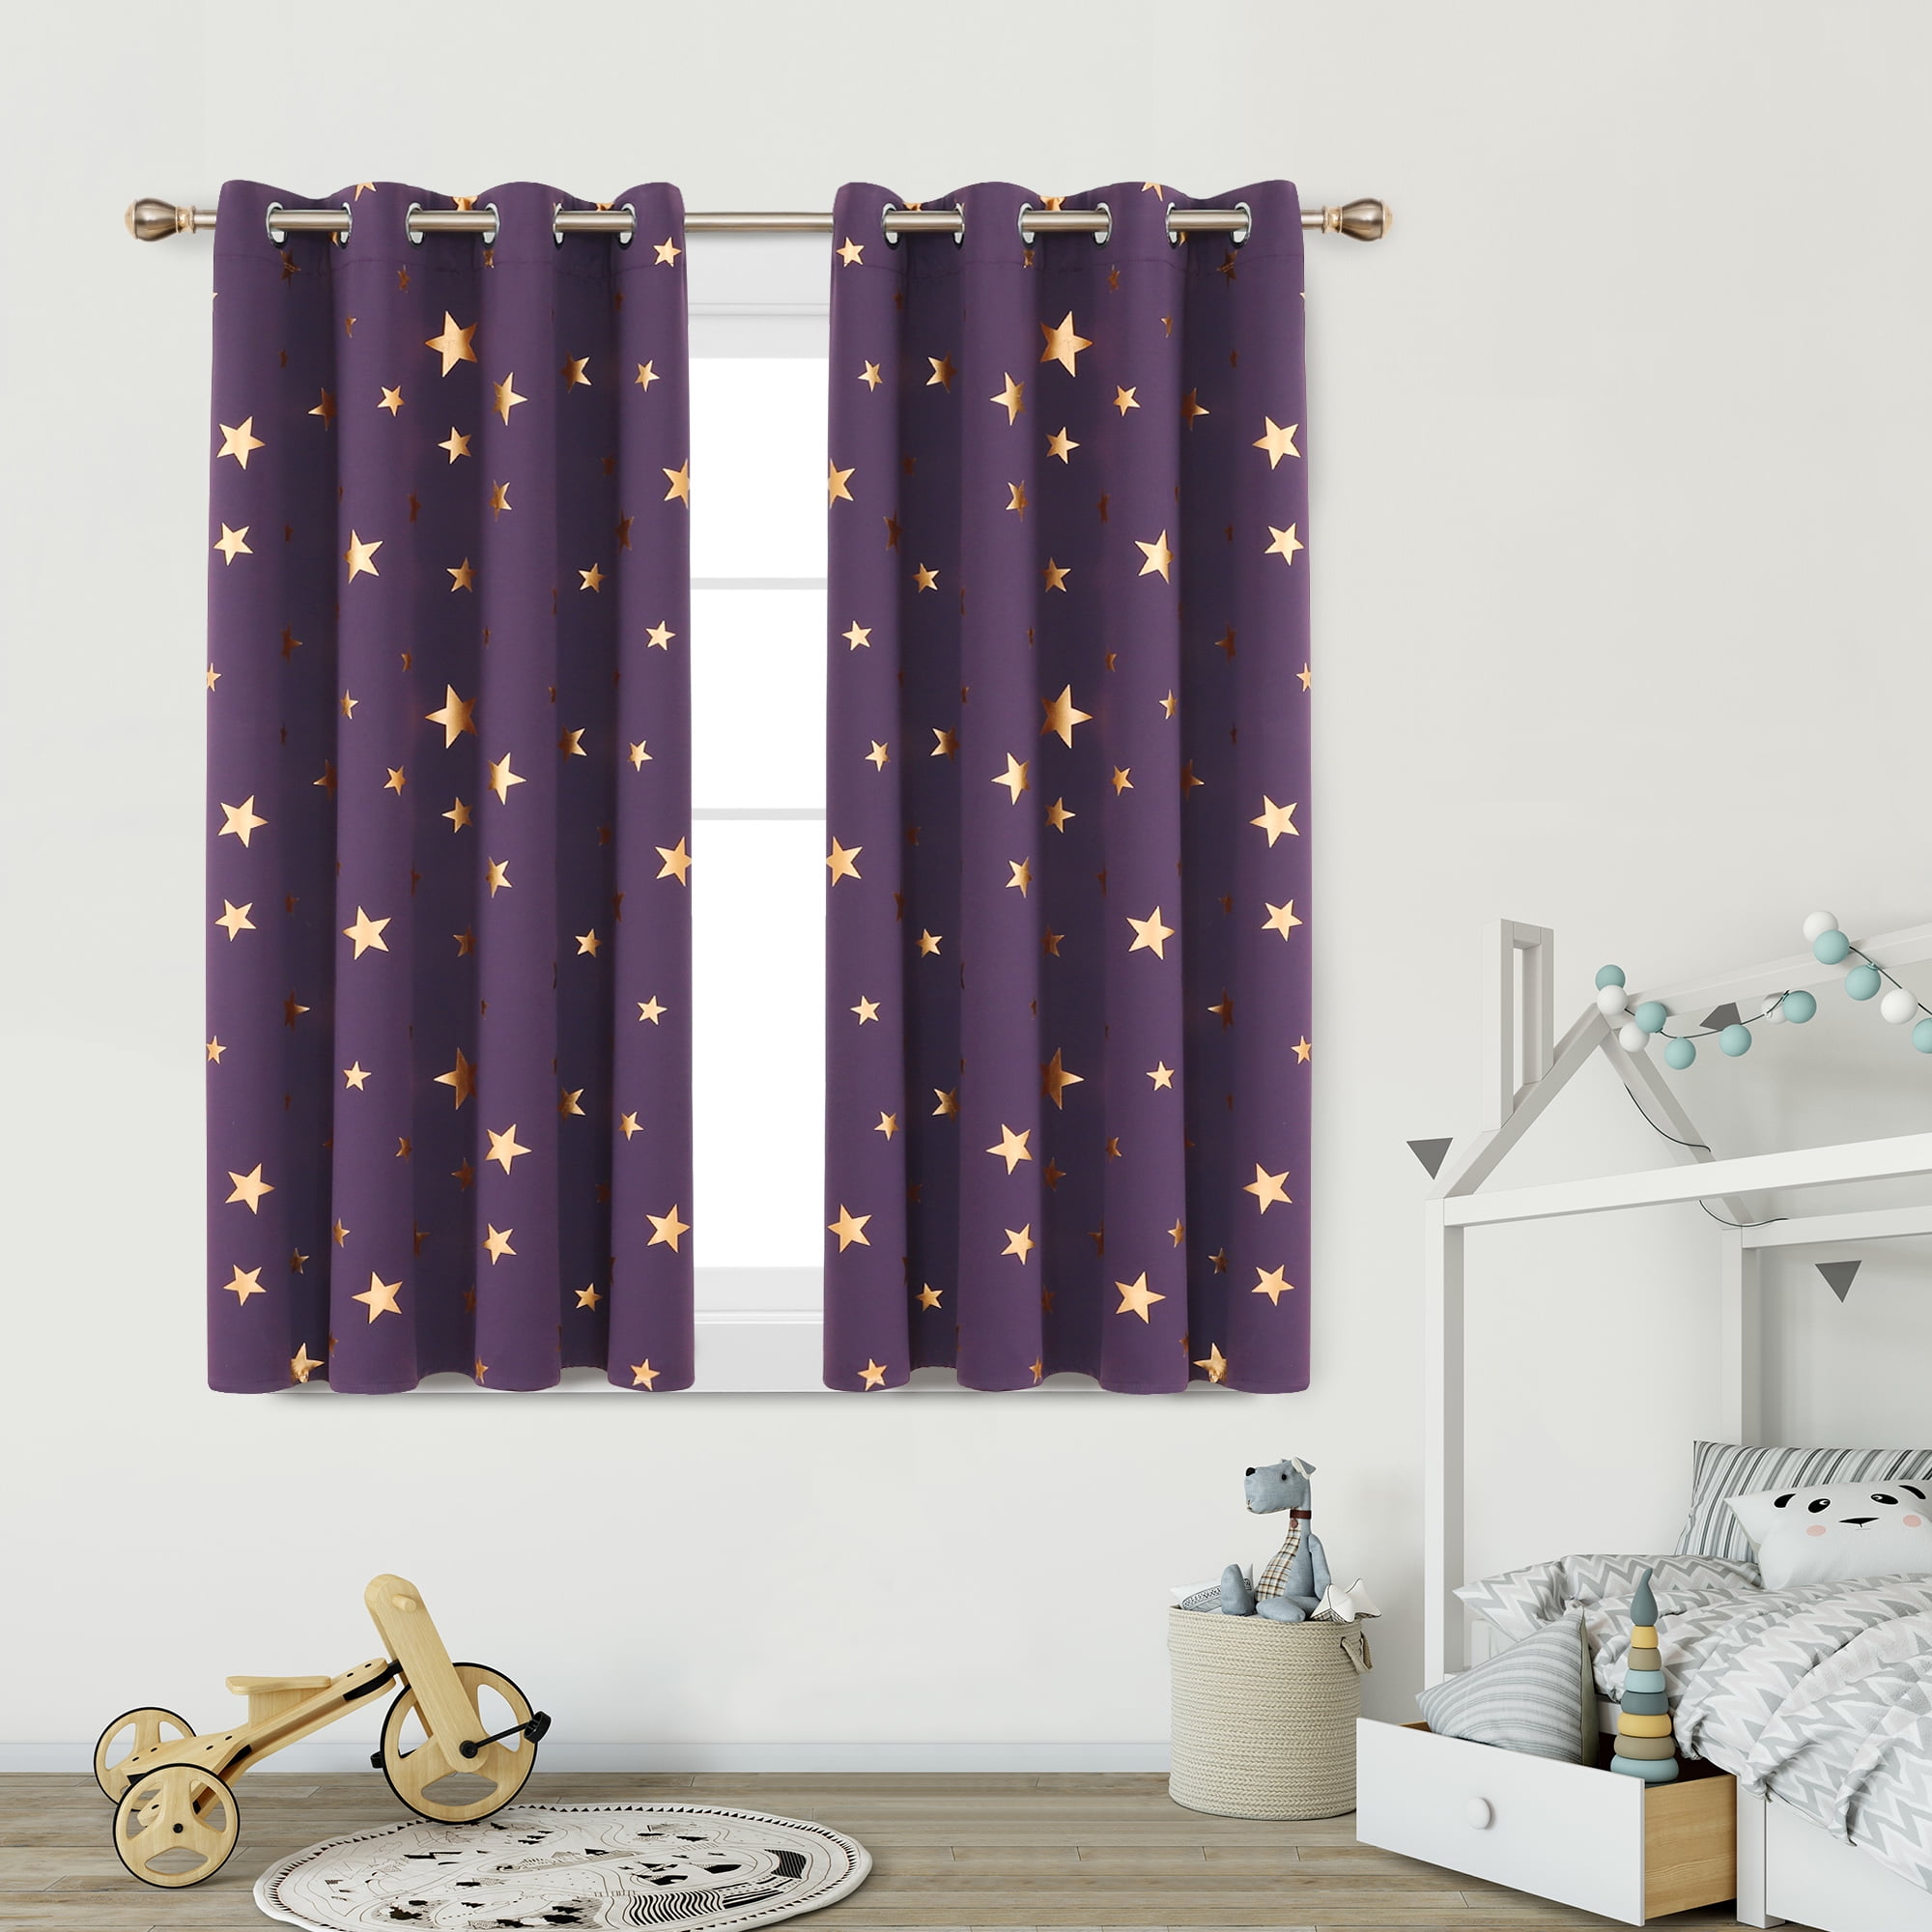 Gradient Color Printed Curtains Soft Polyester Thermal Insulated Grommet Ombre Purple Blackout Window Drapes for Nursery Kid's Room W52 X L84 2 Panels Purple